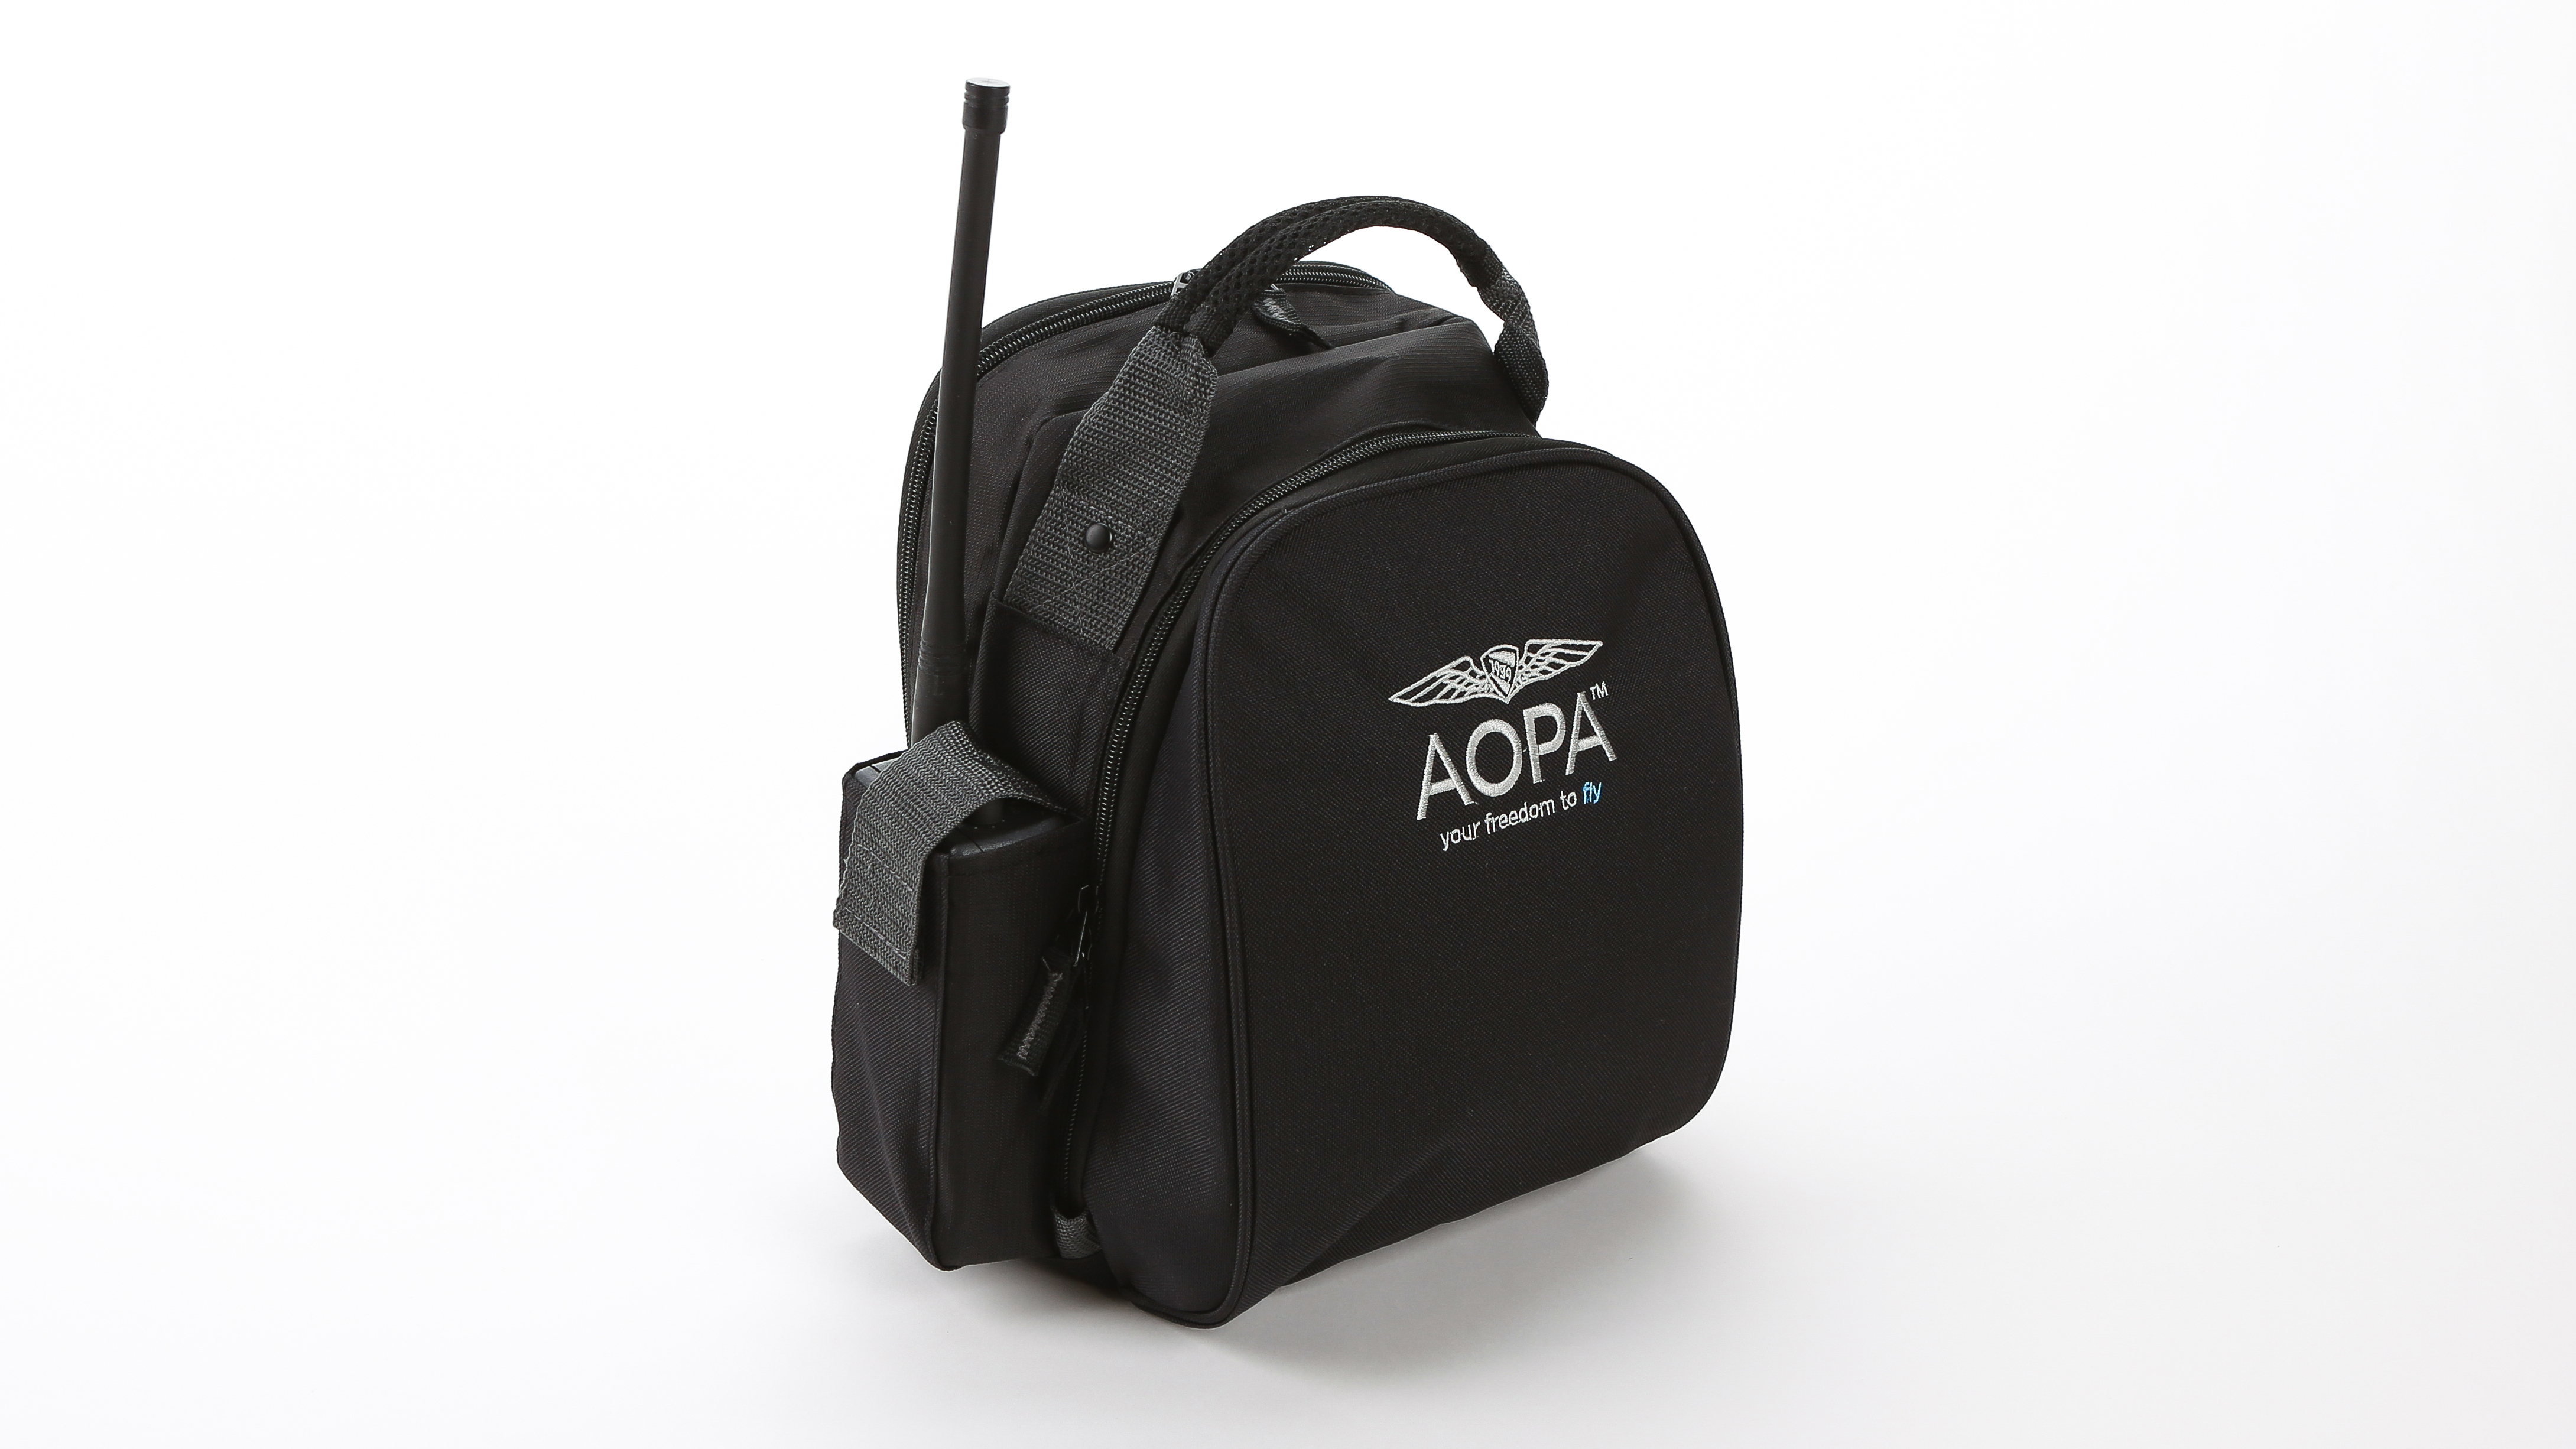 Renew your AOPA membership and receive a free headset bag.